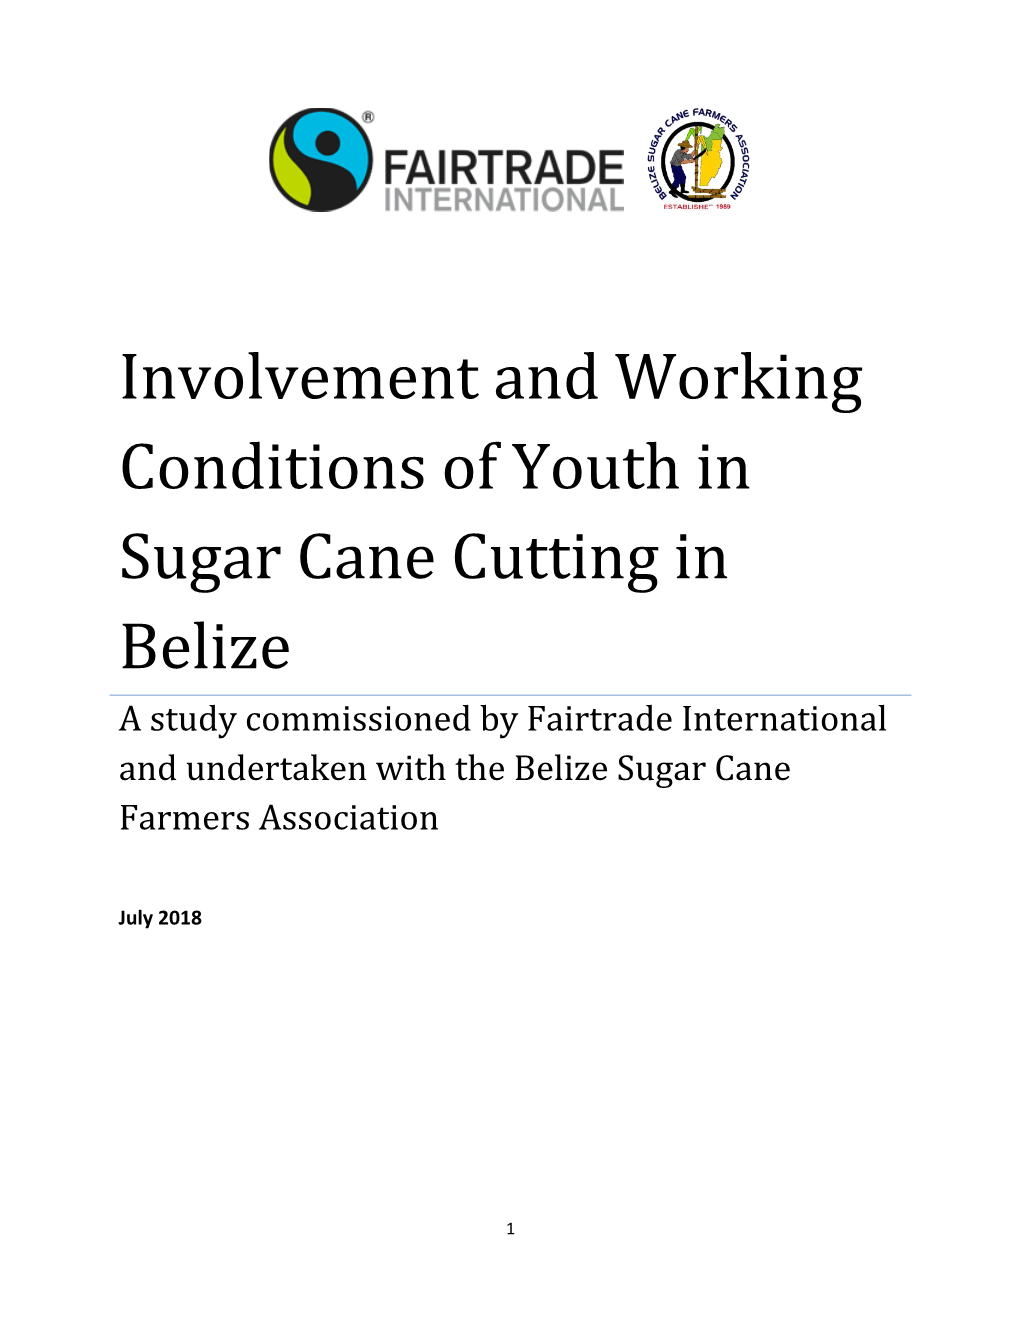 Involvement and Working Conditions of Youth in Sugar Cane Cutting In